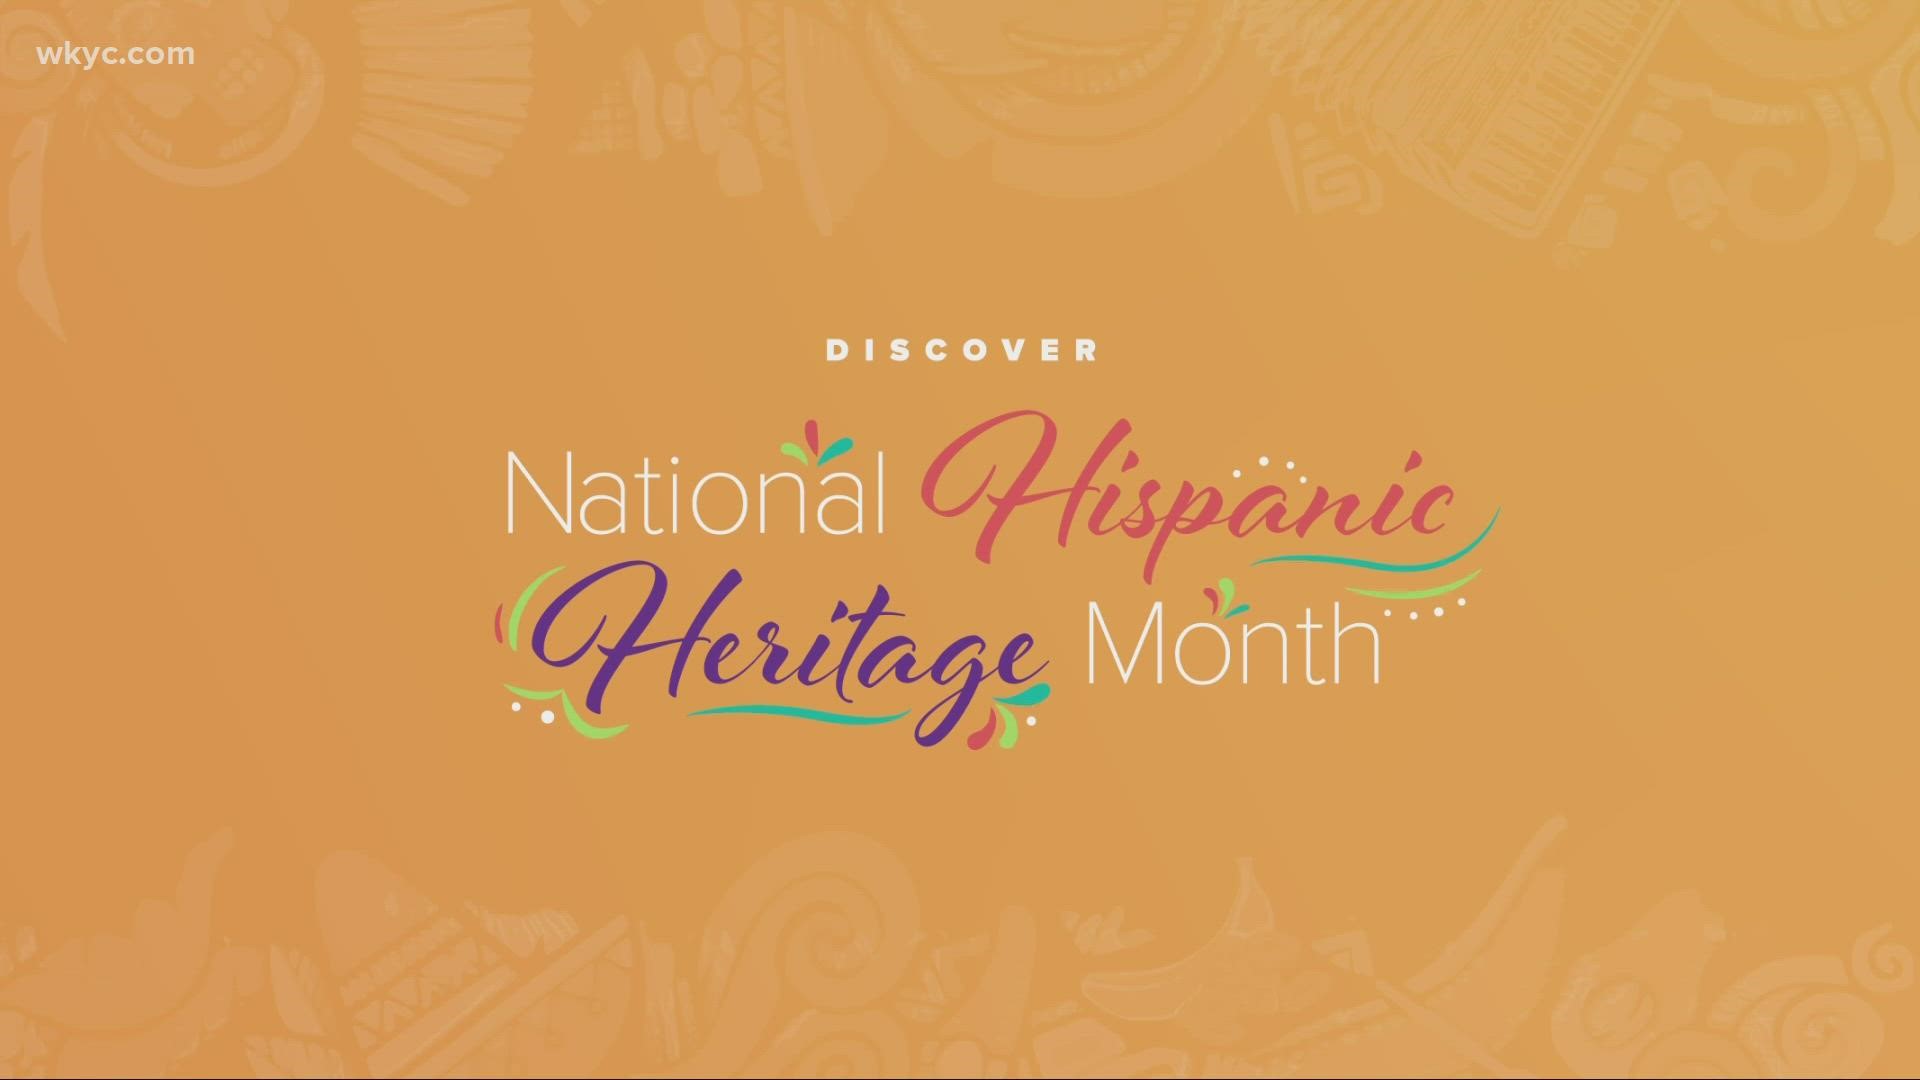 Hispanic Heritage Month spans from Wednesday, Sept. 15 through Friday, Oct. 15.